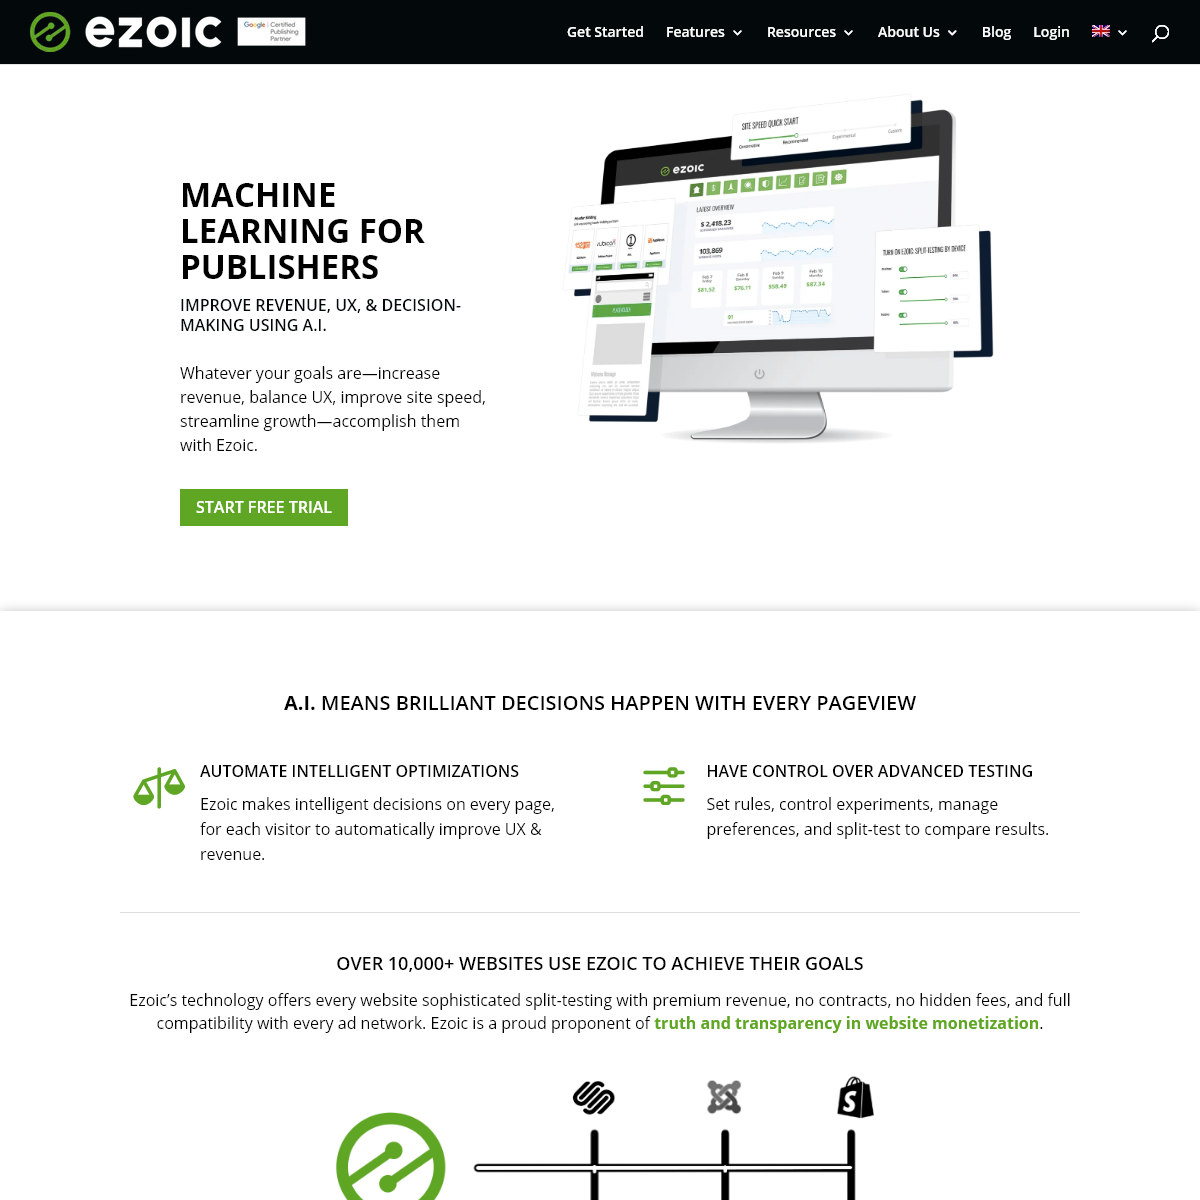 A complete backup of ezoic.com